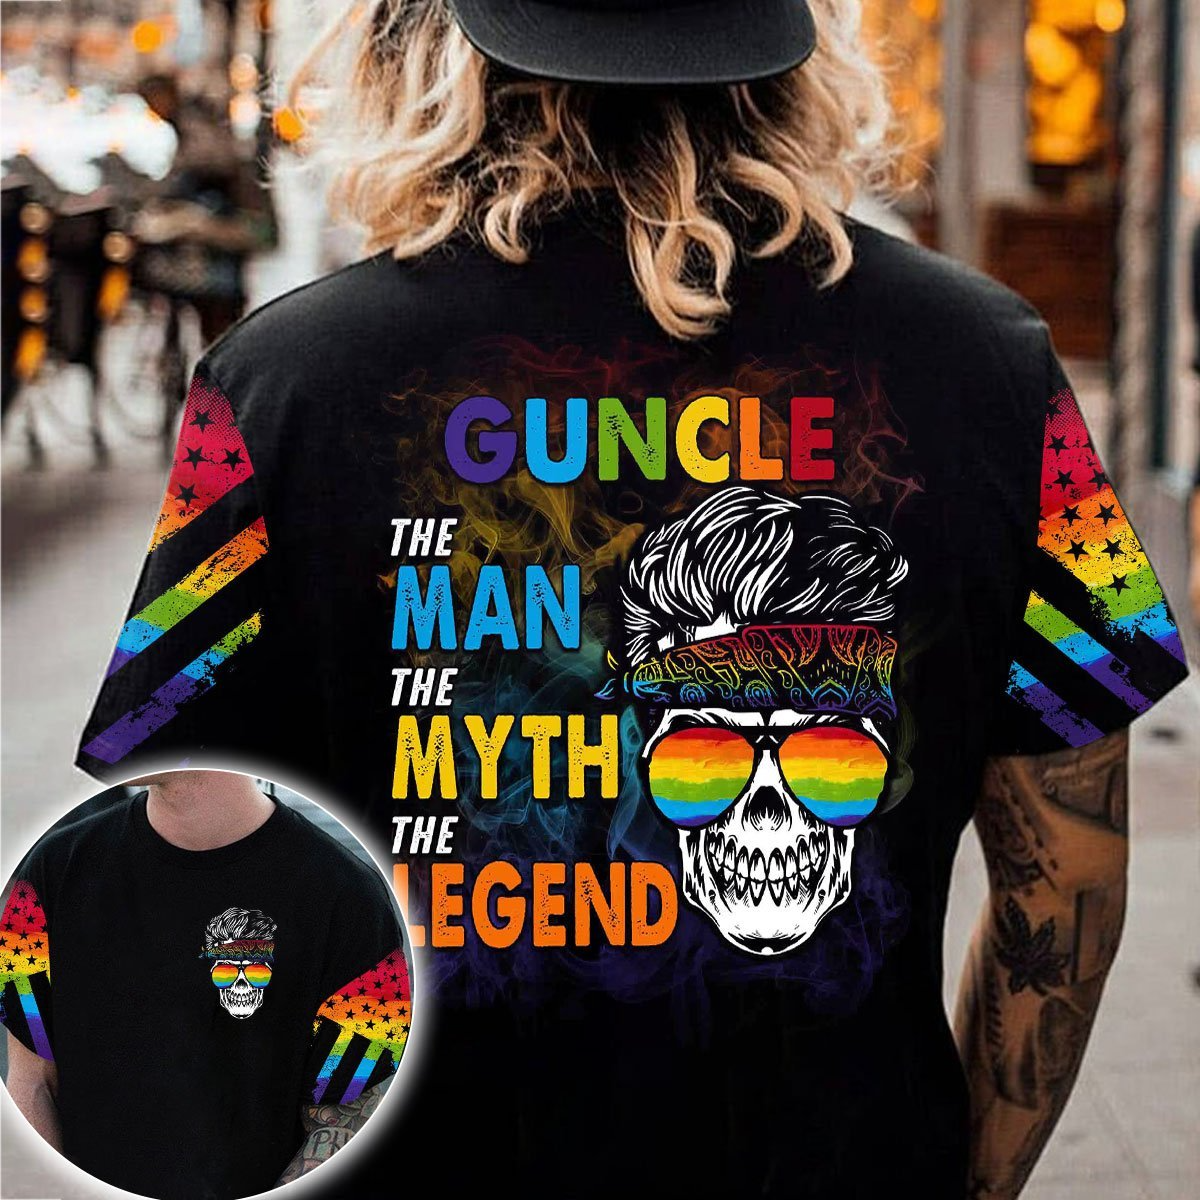 LGBT Guncle Tee Shirt The Man The Myth The Legend Shirts For LGBT Pride Month/ Gay Gift On Pride Month